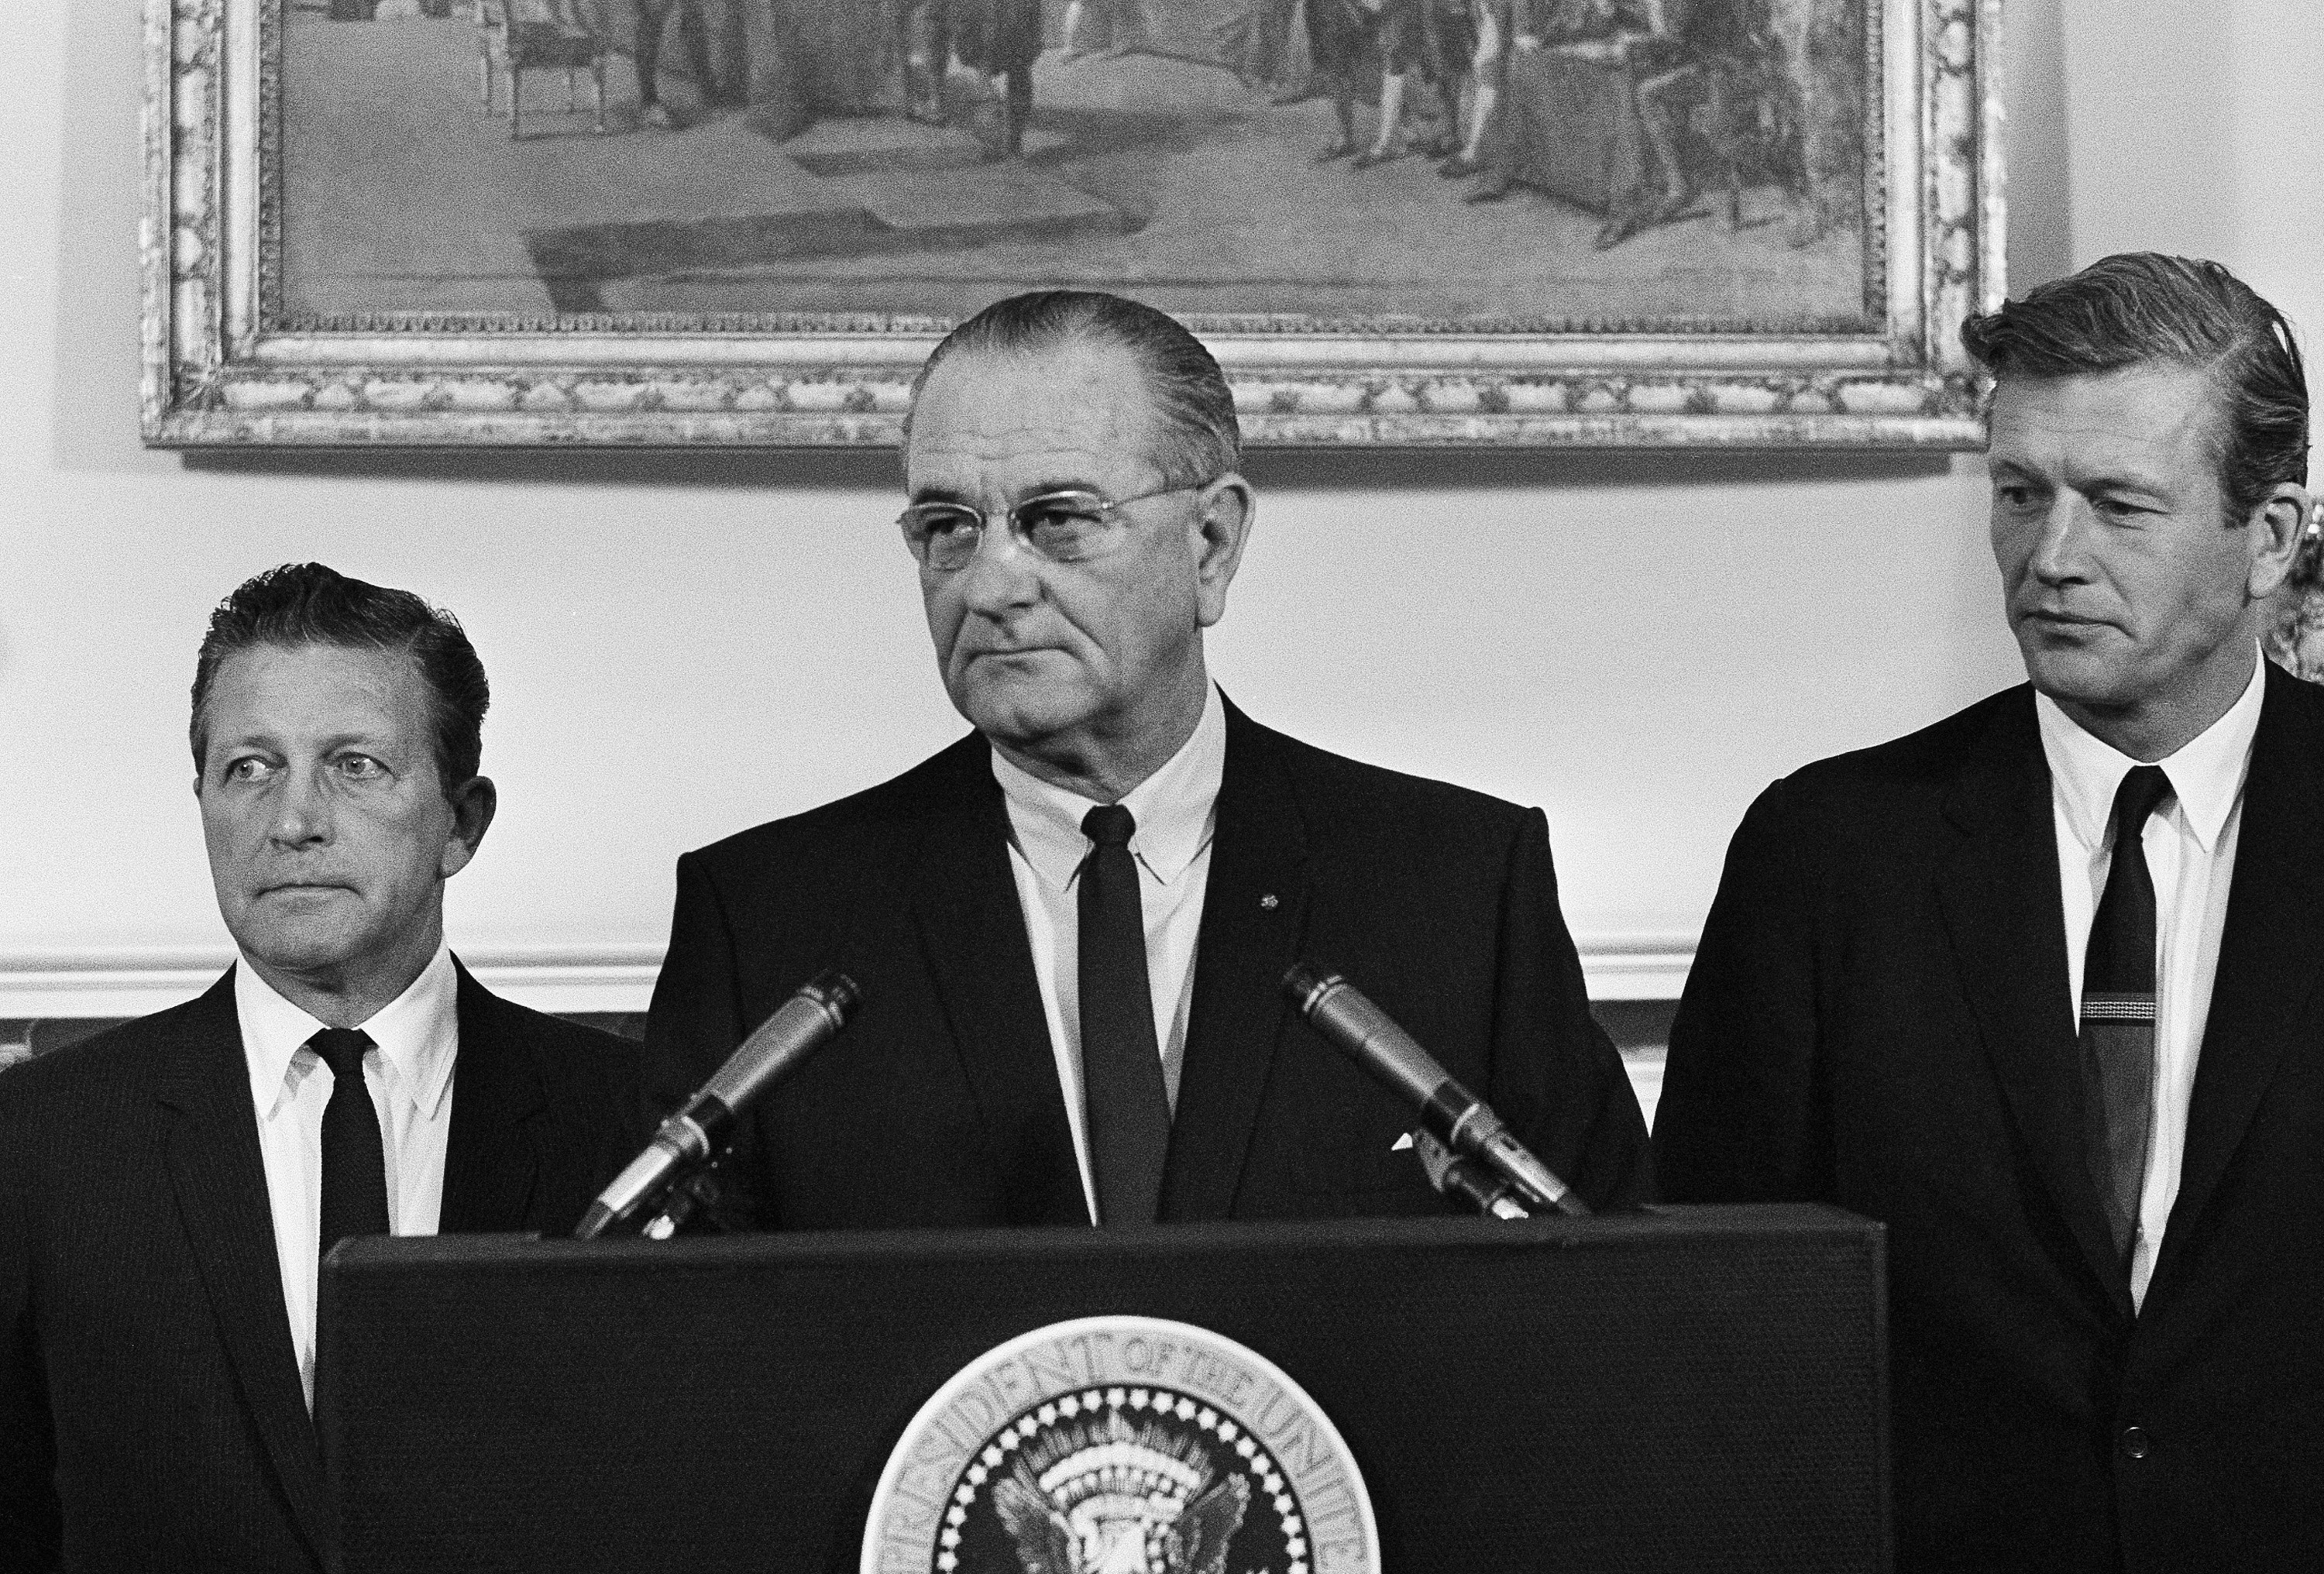 President Lyndon Johnson speaks to members of his advisory commission on civil disorders at the group's first meeting on July 29, 1967 at the White House in Washington. (WX/AP)